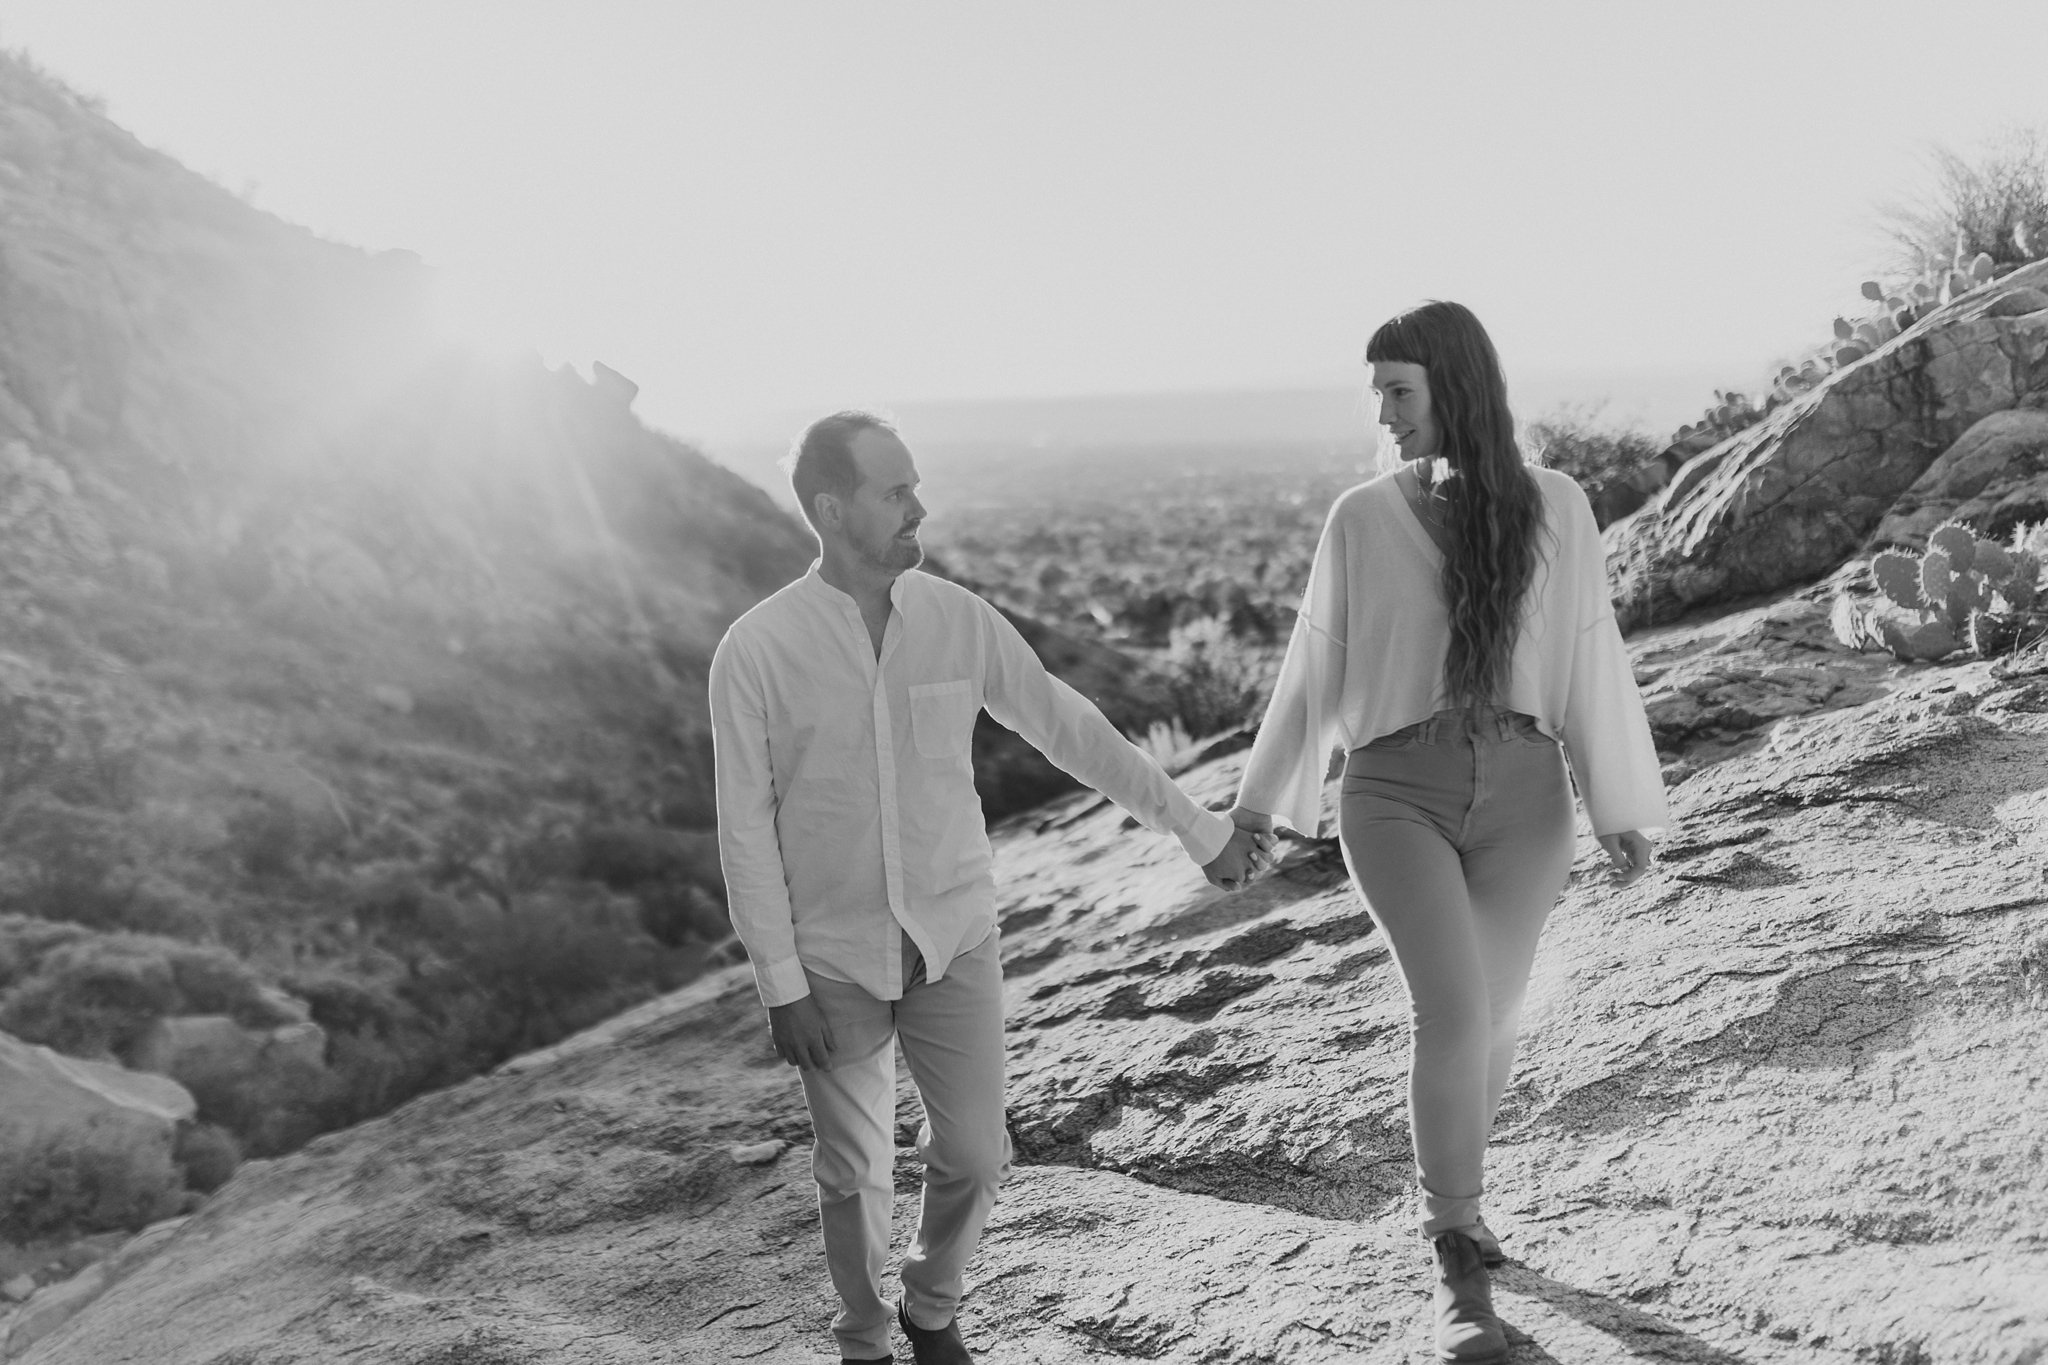 Alicia+lucia+photography+-+albuquerque+wedding+photographer+-+santa+fe+wedding+photography+-+new+mexico+wedding+photographer+-+new+mexico+wedding+-+desert+engagement+-+foothills+engagement+-+mountain+engagement_0025.jpg